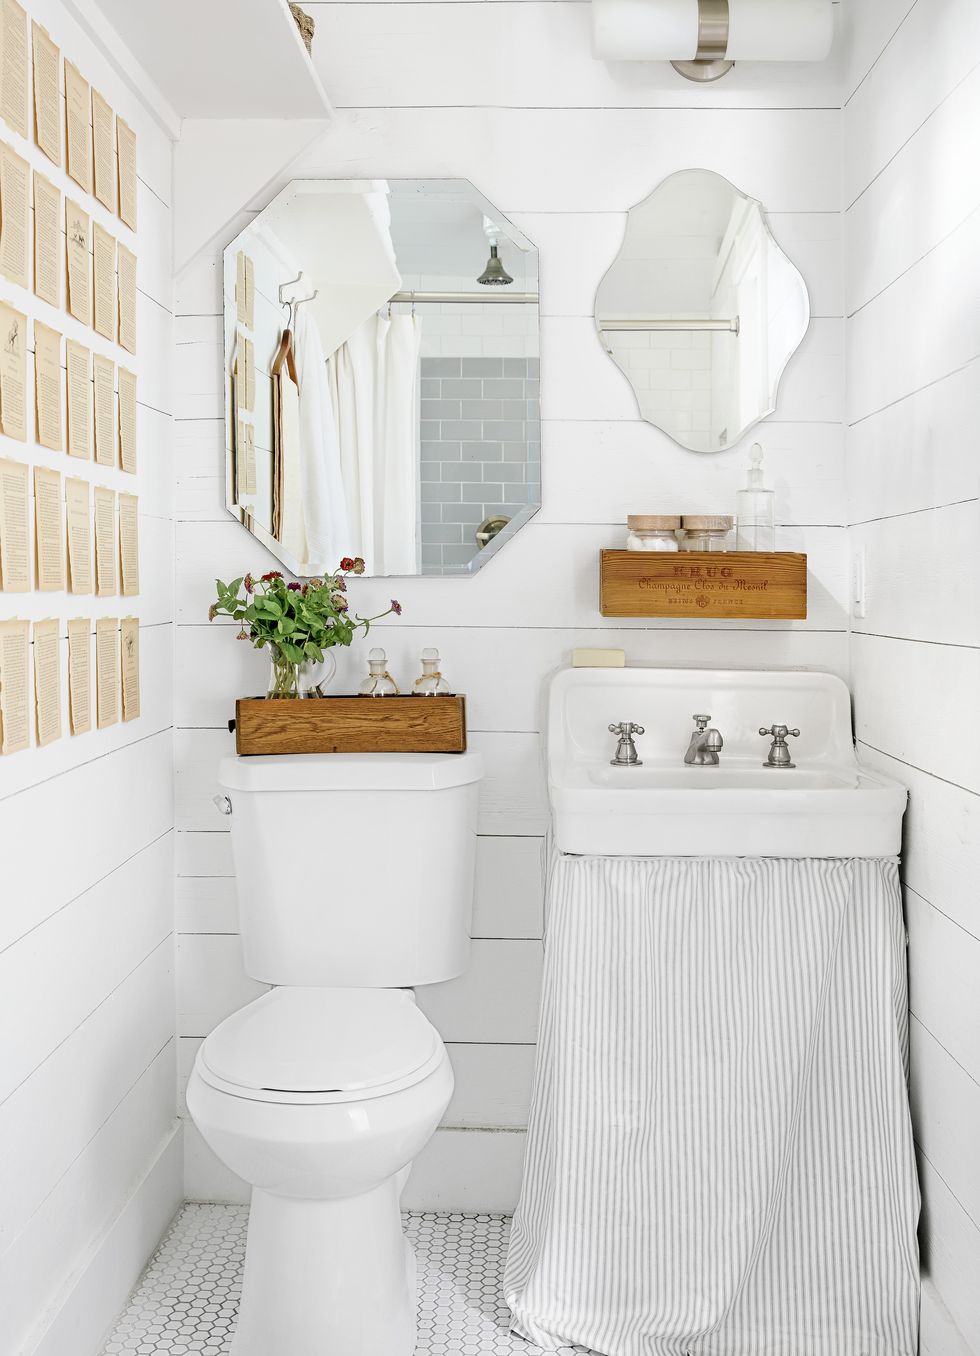 https://hips.hearstapps.com/hmg-prod/images/all-white-half-bathroom-ideas-country-living-4-1582572592.jpg?crop=1.00xw:0.922xh;0,0.0783xh&resize=980:*